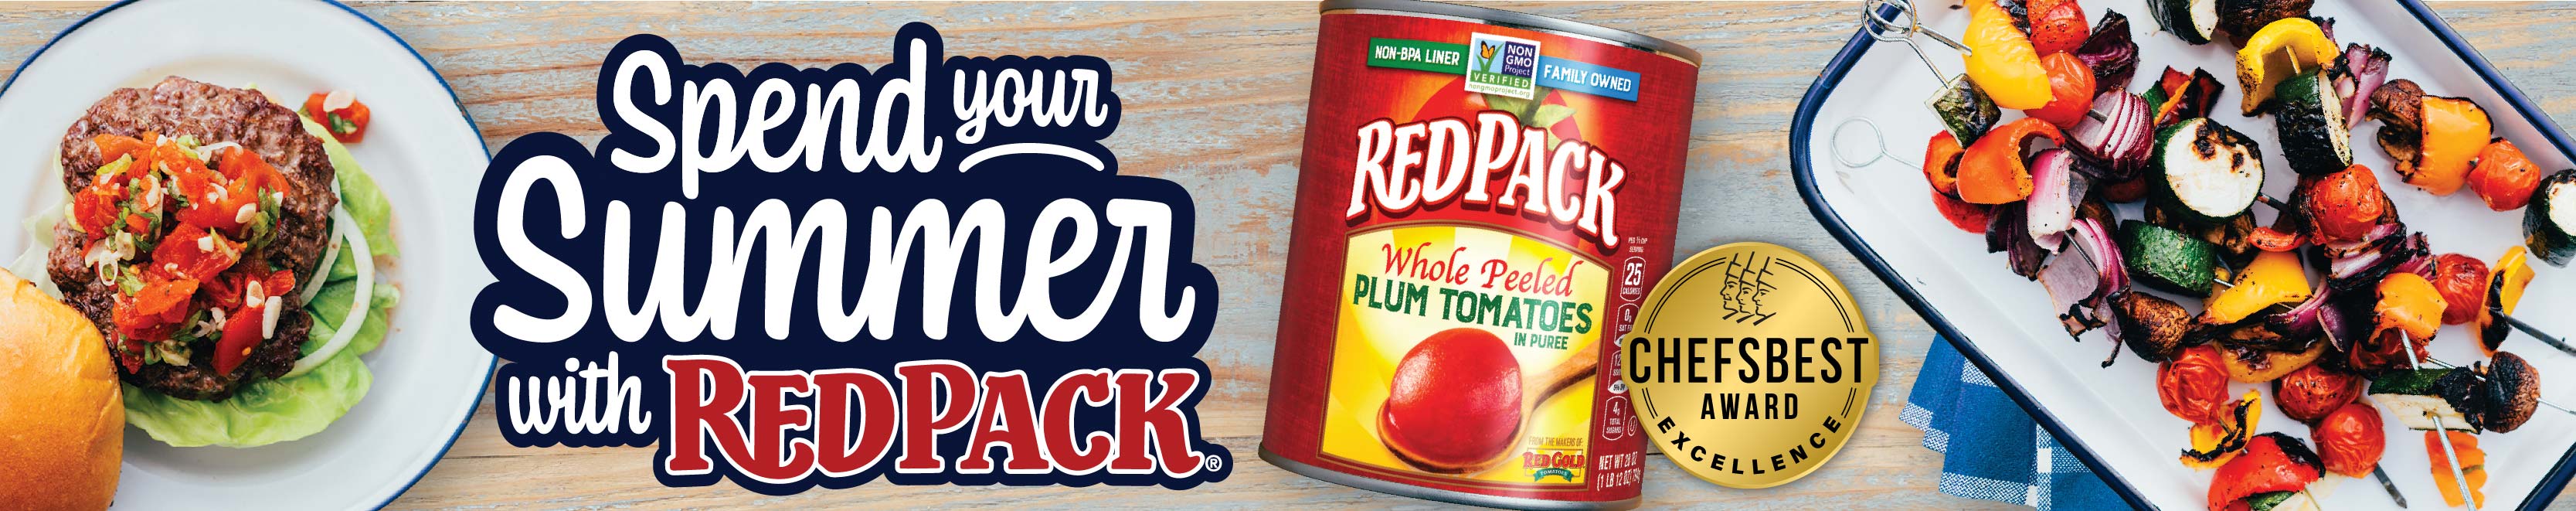 Spend Your Summer with Redpack Award-Winning Tomatoes